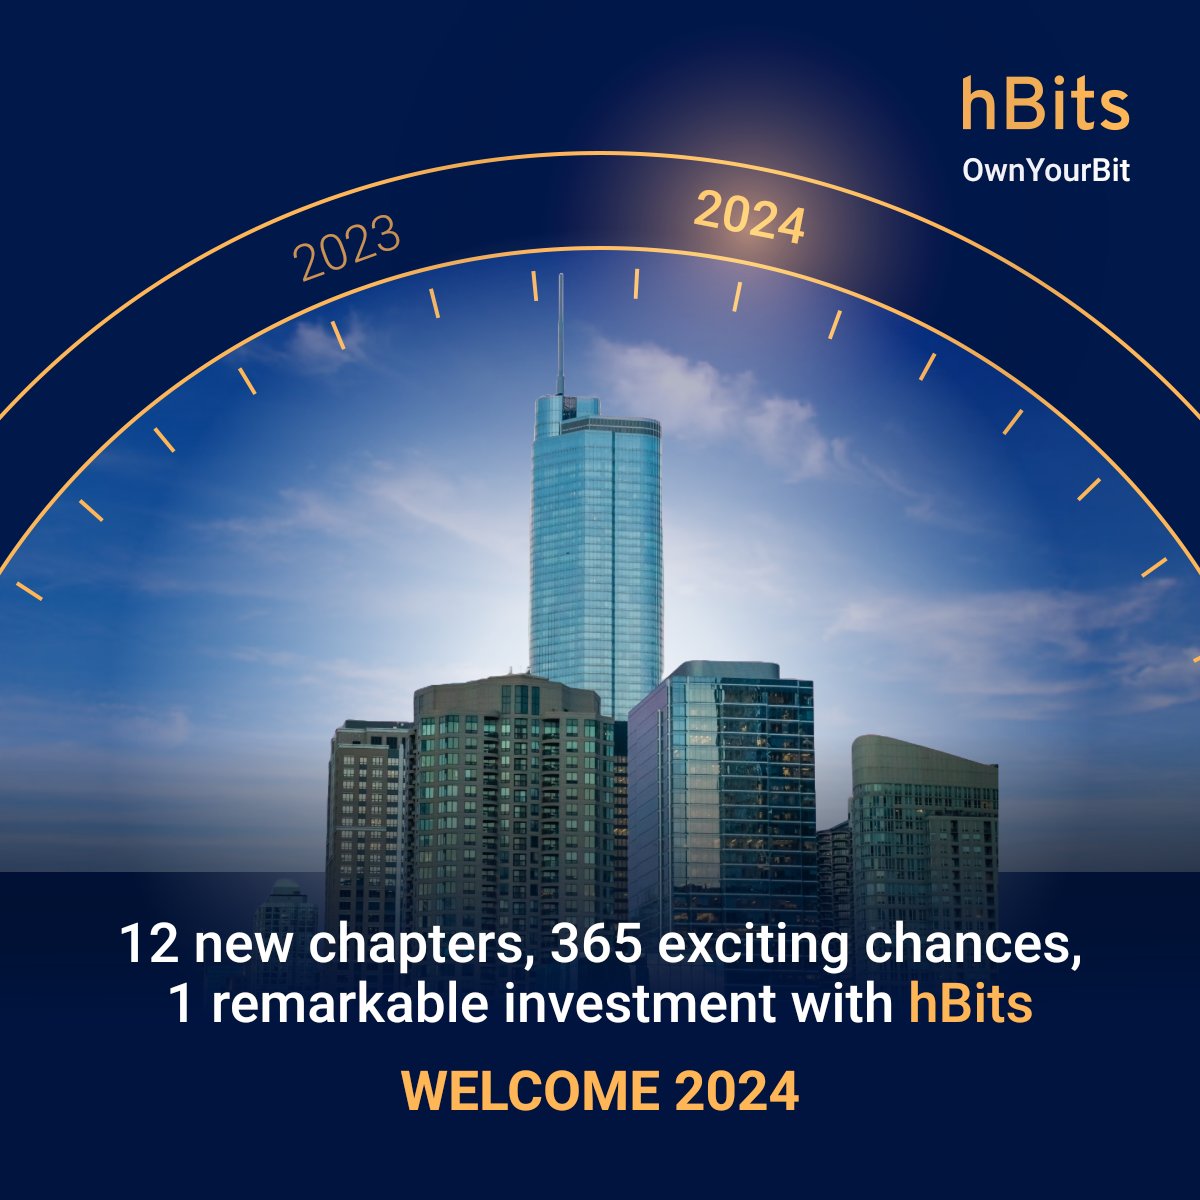 Together, let’s make 2024 the year where all our BIG dreams come true. Here’s wishing everyone a happy, successful, and joyous new year from team hBits! #hBits #ownyourbit #NewYear #2024 #welcome #newbeginnings #Celebrations #FractionalOwnership #Realestateinvestment